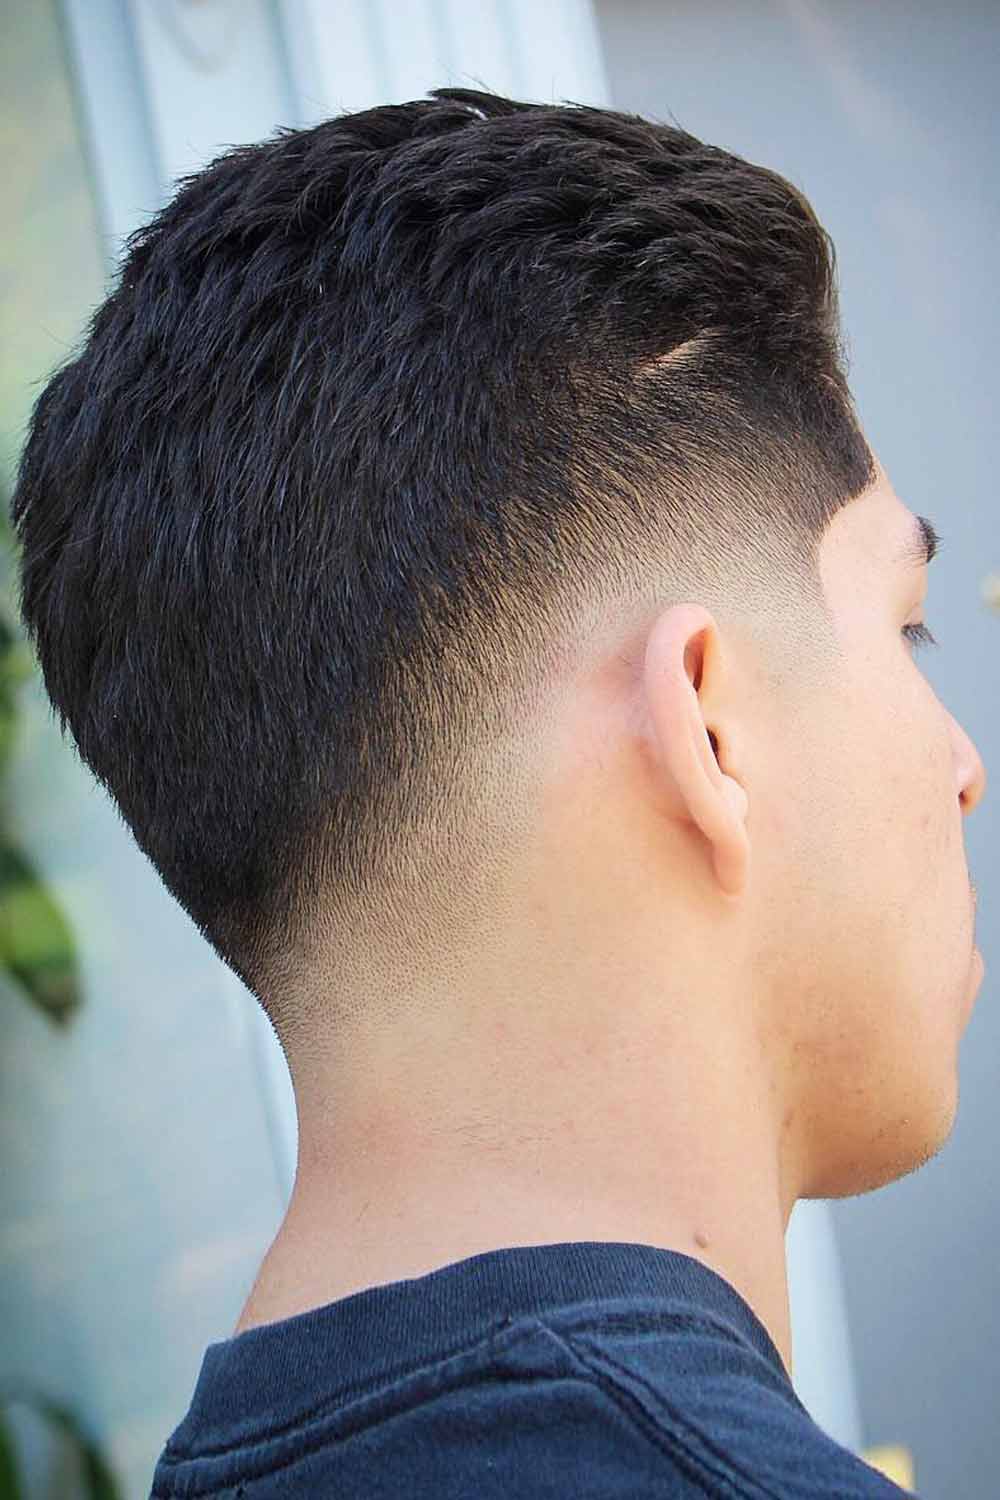 20 Short Haircuts For Men To Get This Year